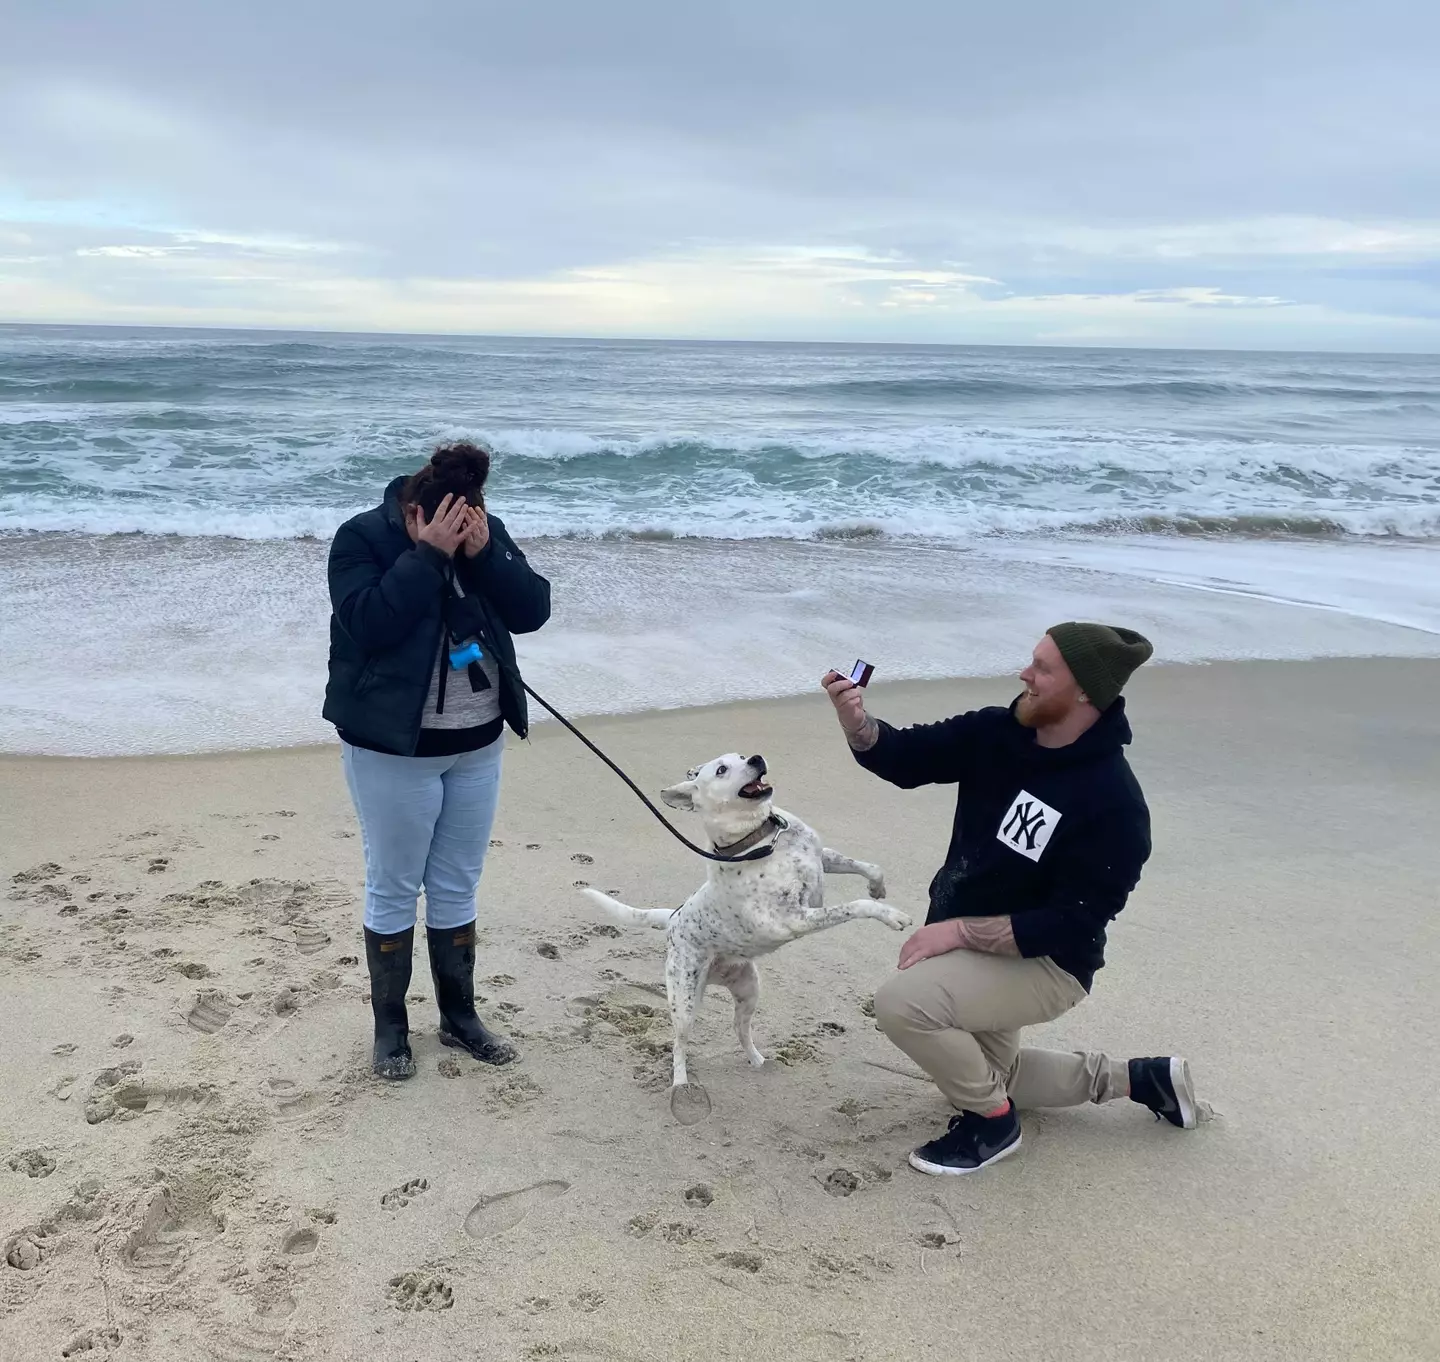 Breeze the dog was quick to accept the proposal.